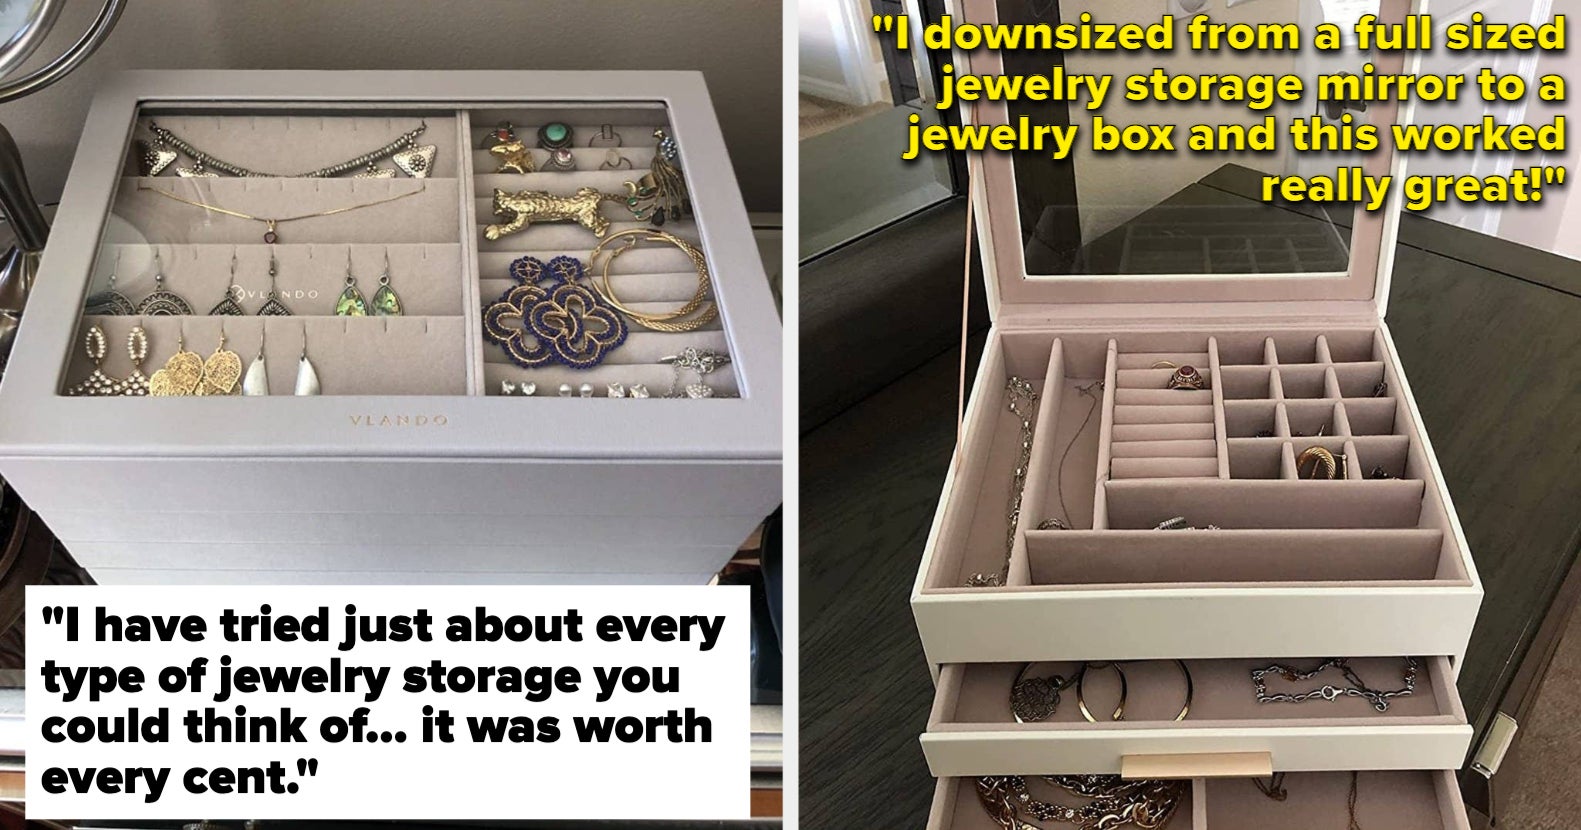 Best Travel Jewelry Box from Oprah's Favorite Things 2022 on Sale